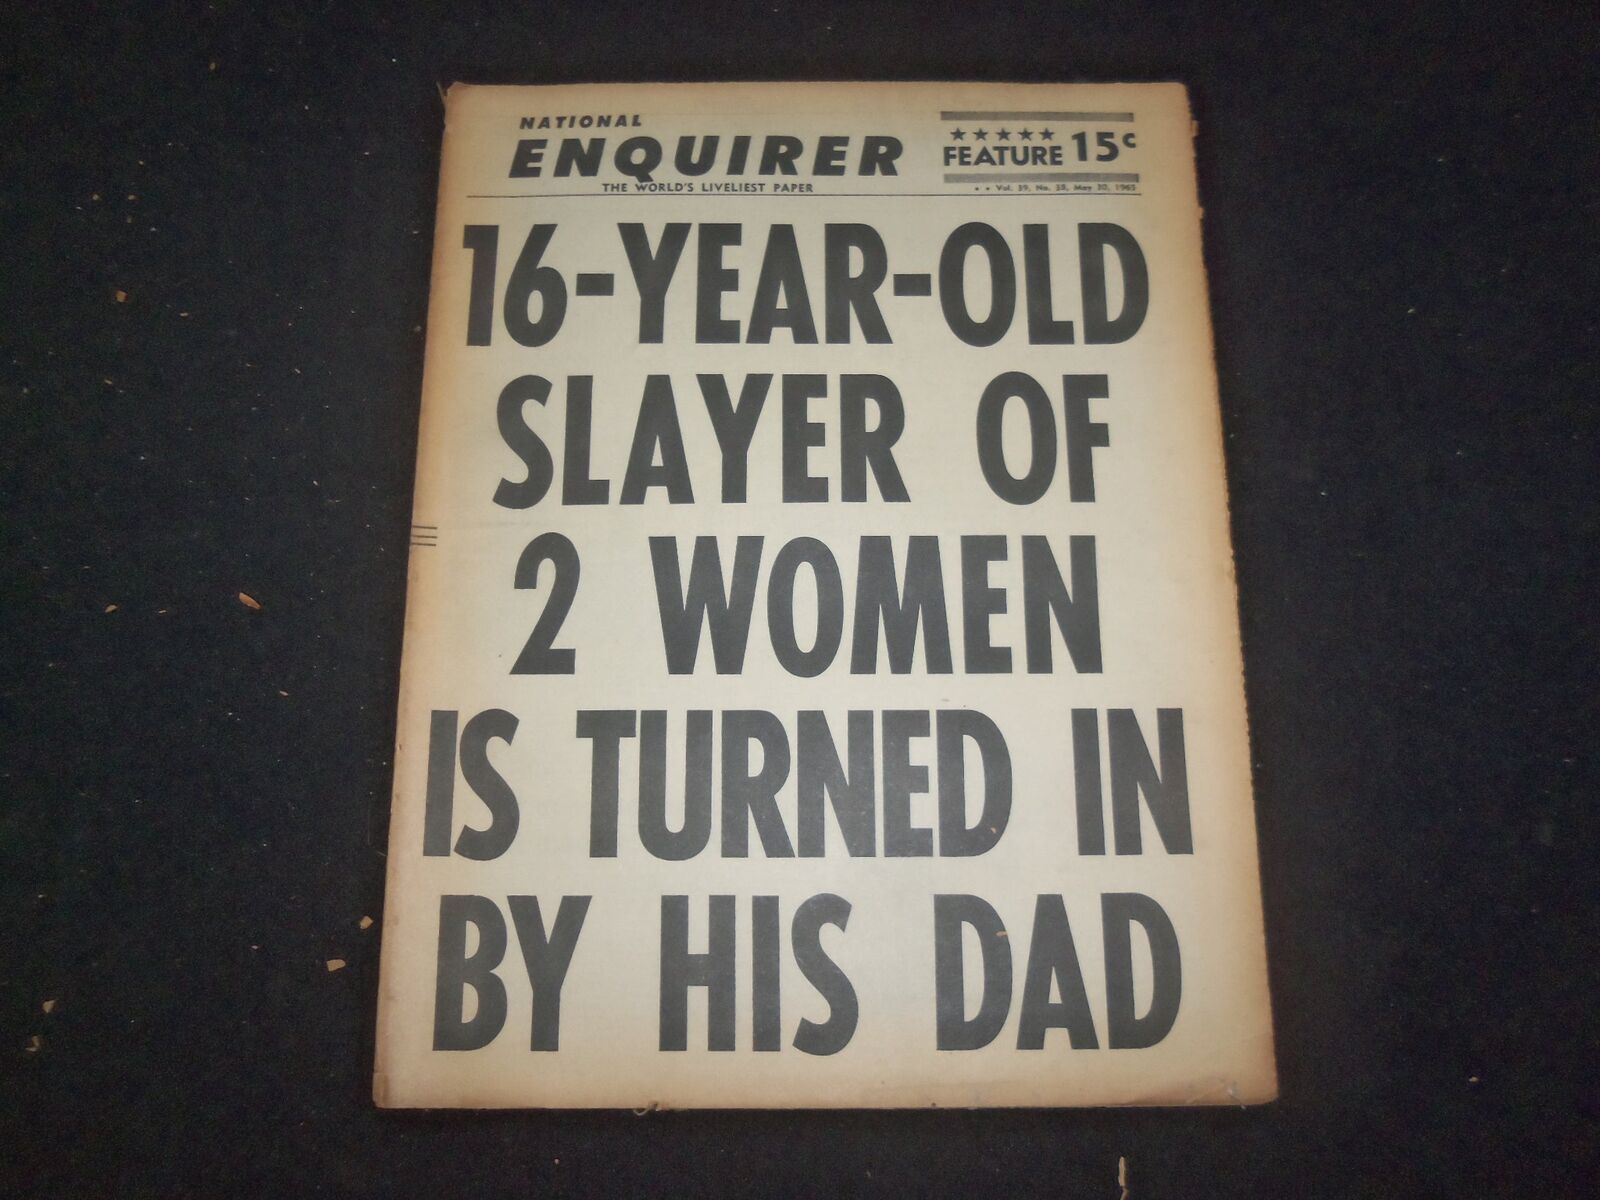 1965 MAY 30 NATIONAL ENQUIRER NEWSPAPER - 16-YEAR OLD SLAVER OF 2 WOMEN- NP 7387